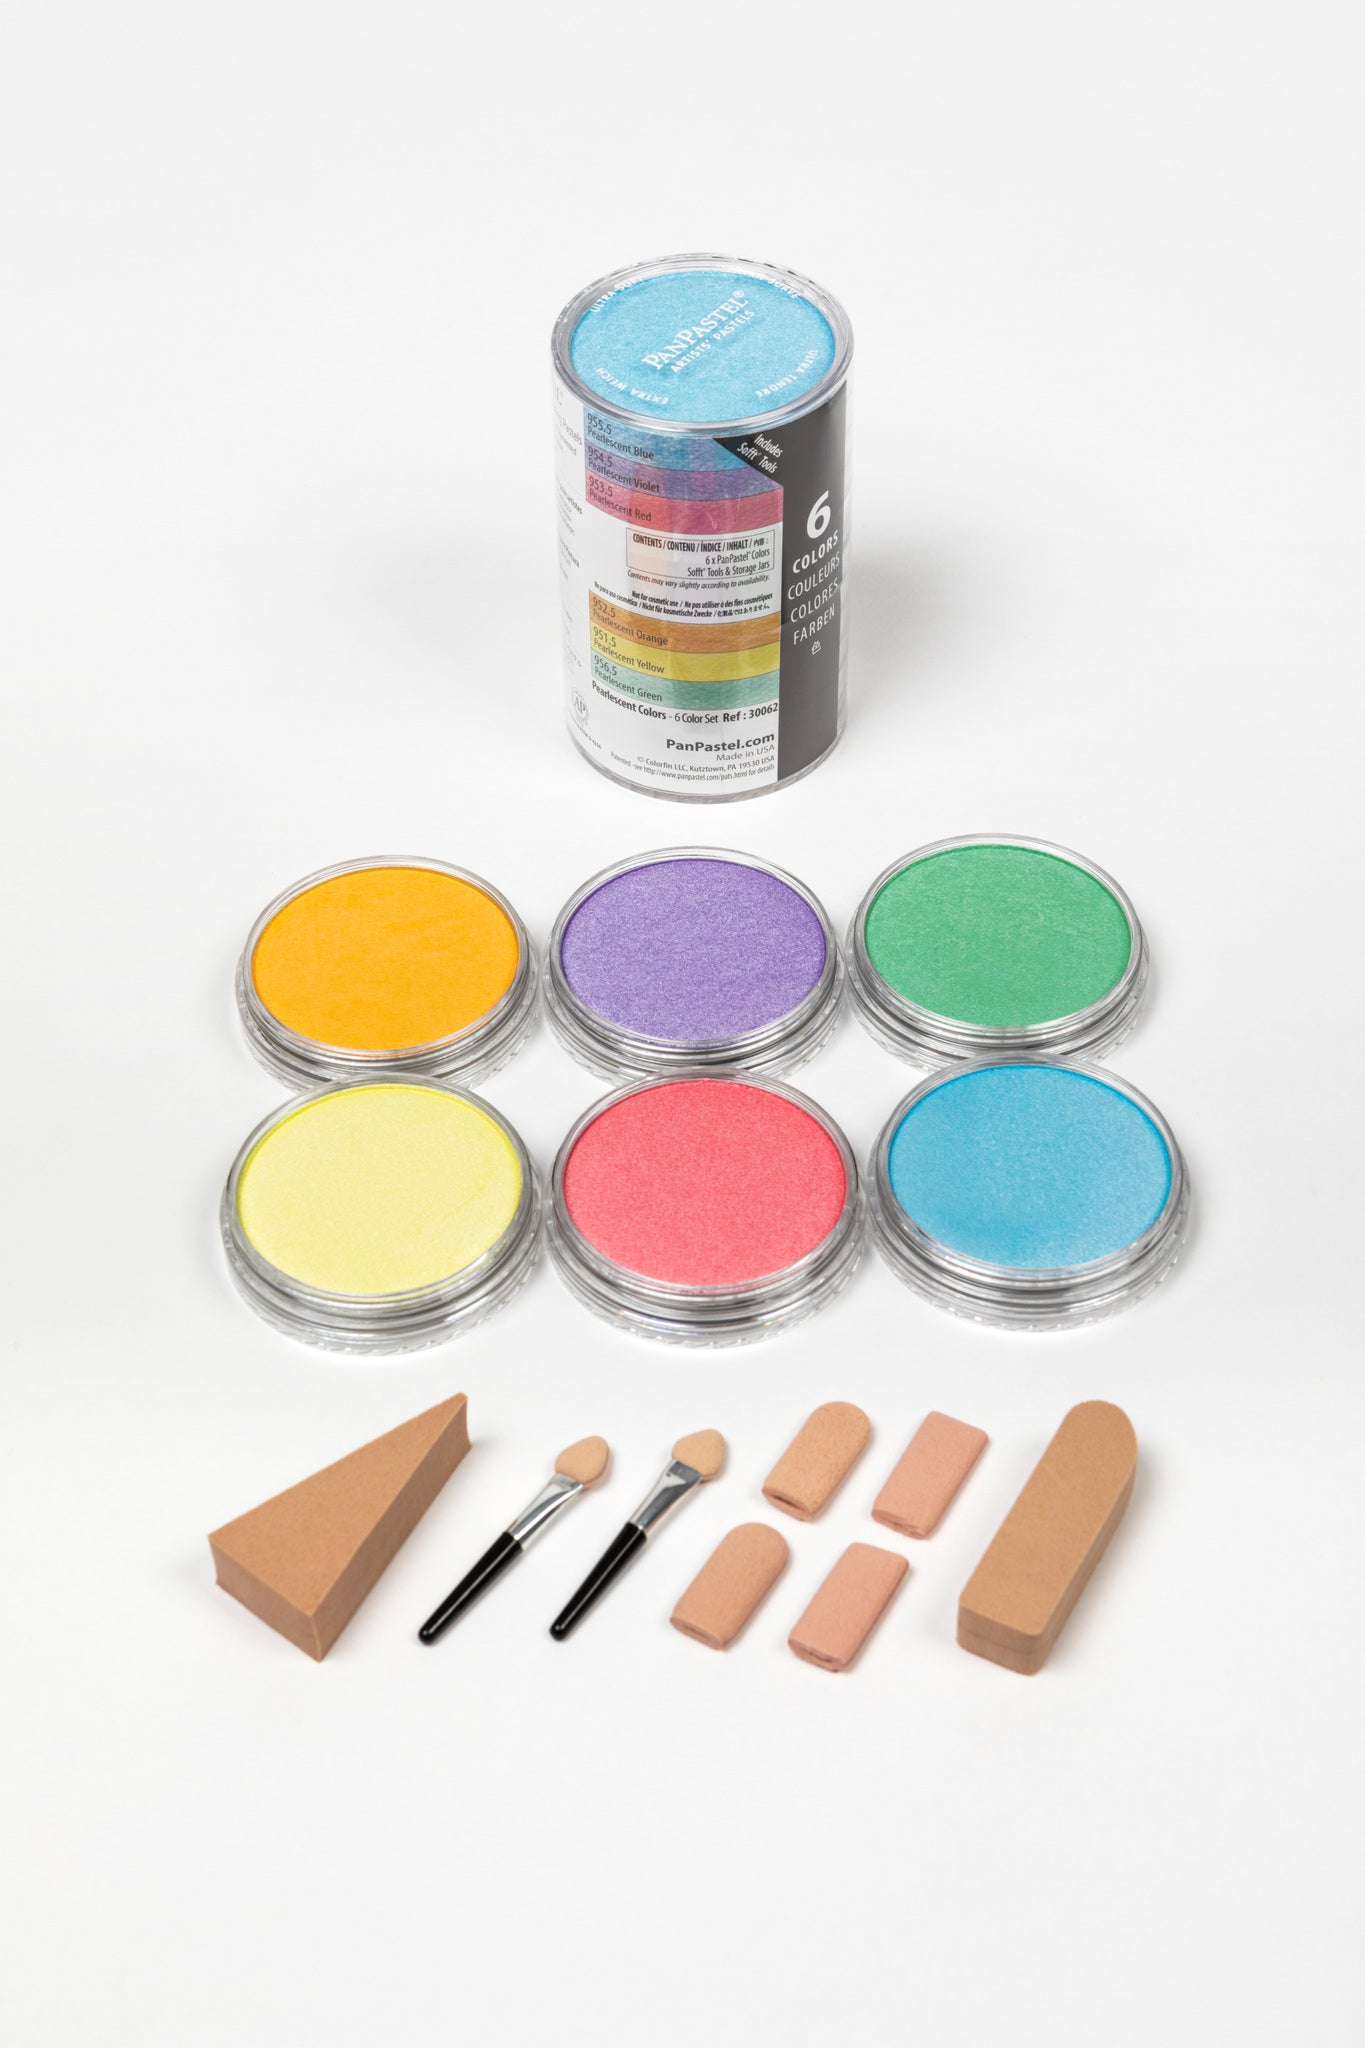 PanPastel Pearlescent Colours are rich lustrous colours which can be mixed with each other and also with the original PanPastel Colours. They create beautiful shimmer without appearing glittery.